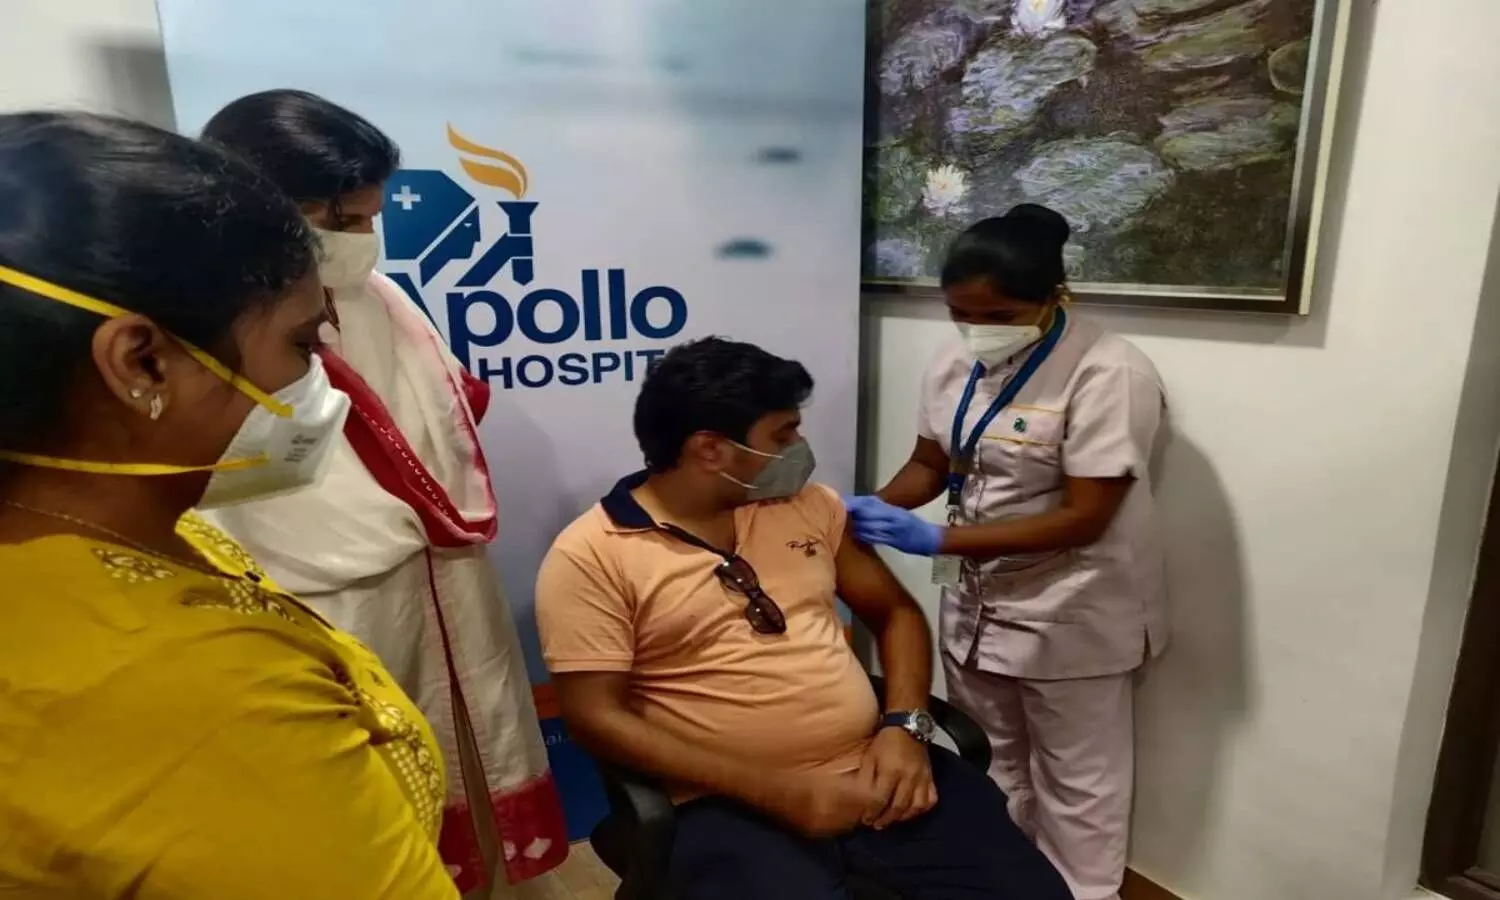 Special freedom offer: Apollo hospital slashes Covaxin price to celebrate Independence Day